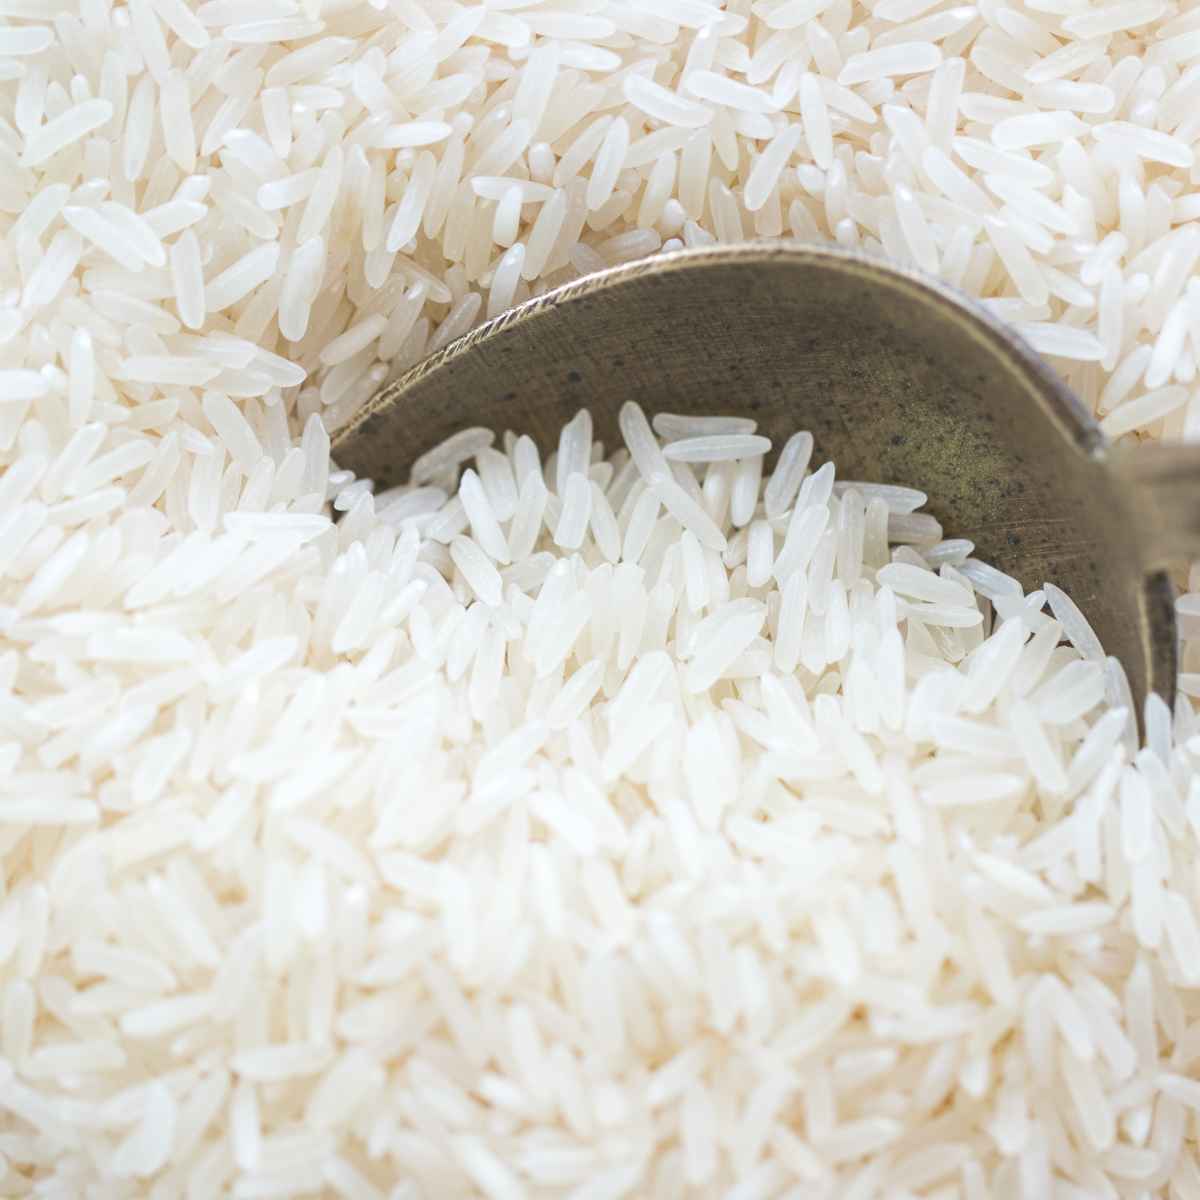 Rice on a spoon.